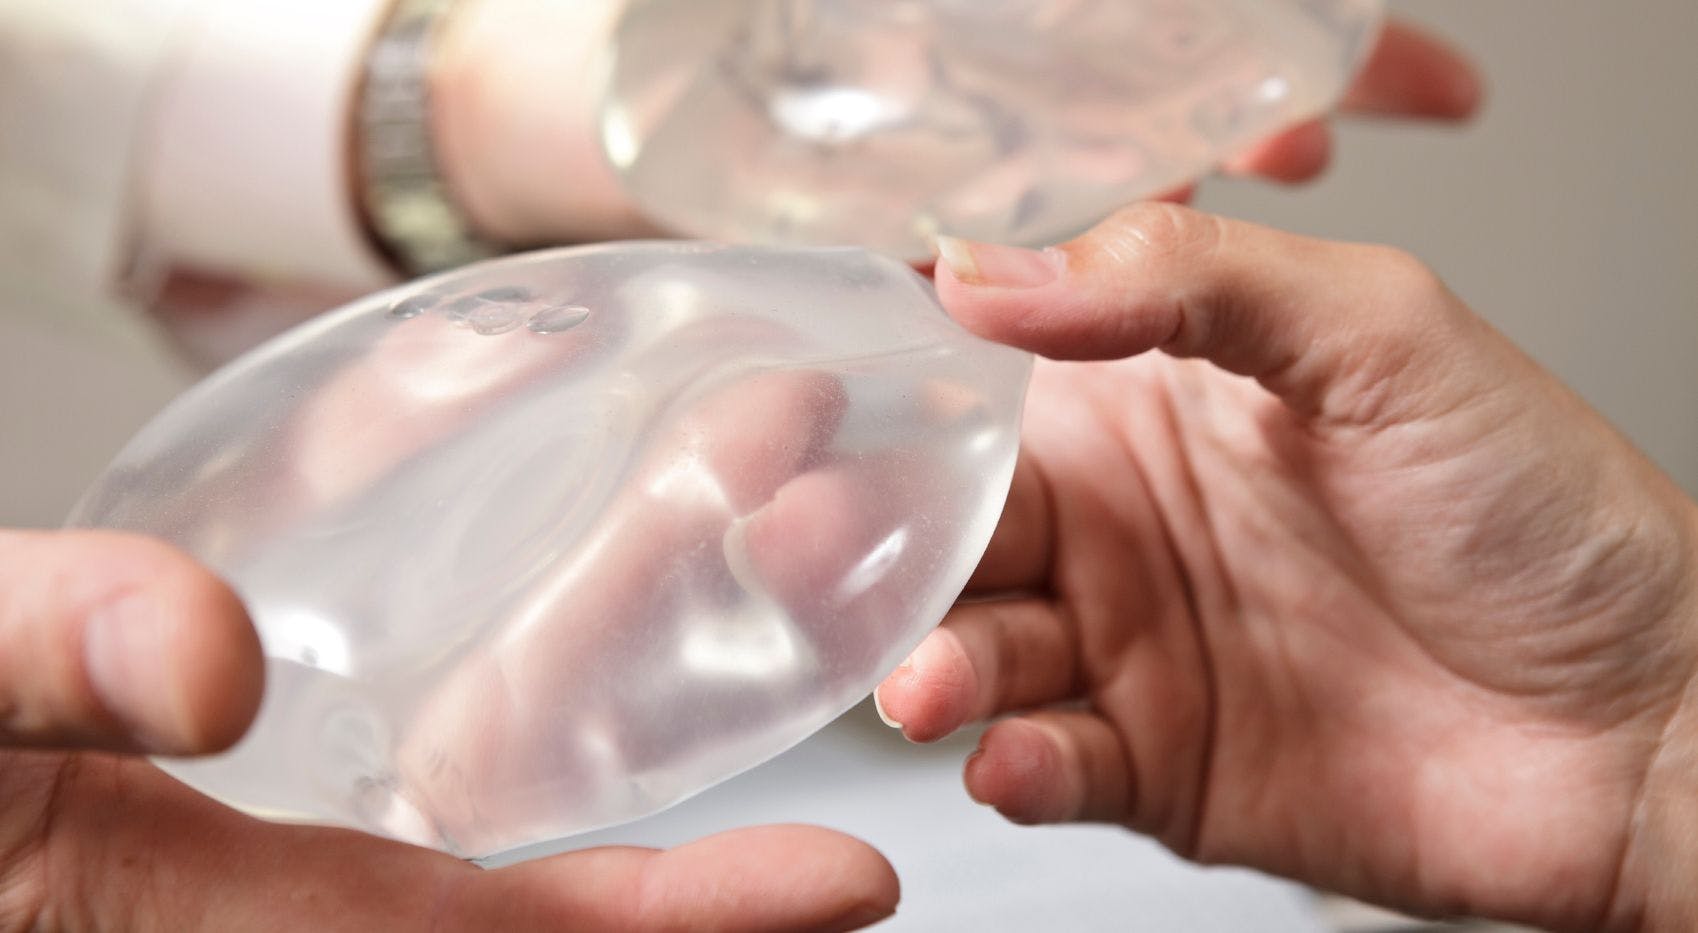 FDA Recommends Black-Box Warning on Breast Implants